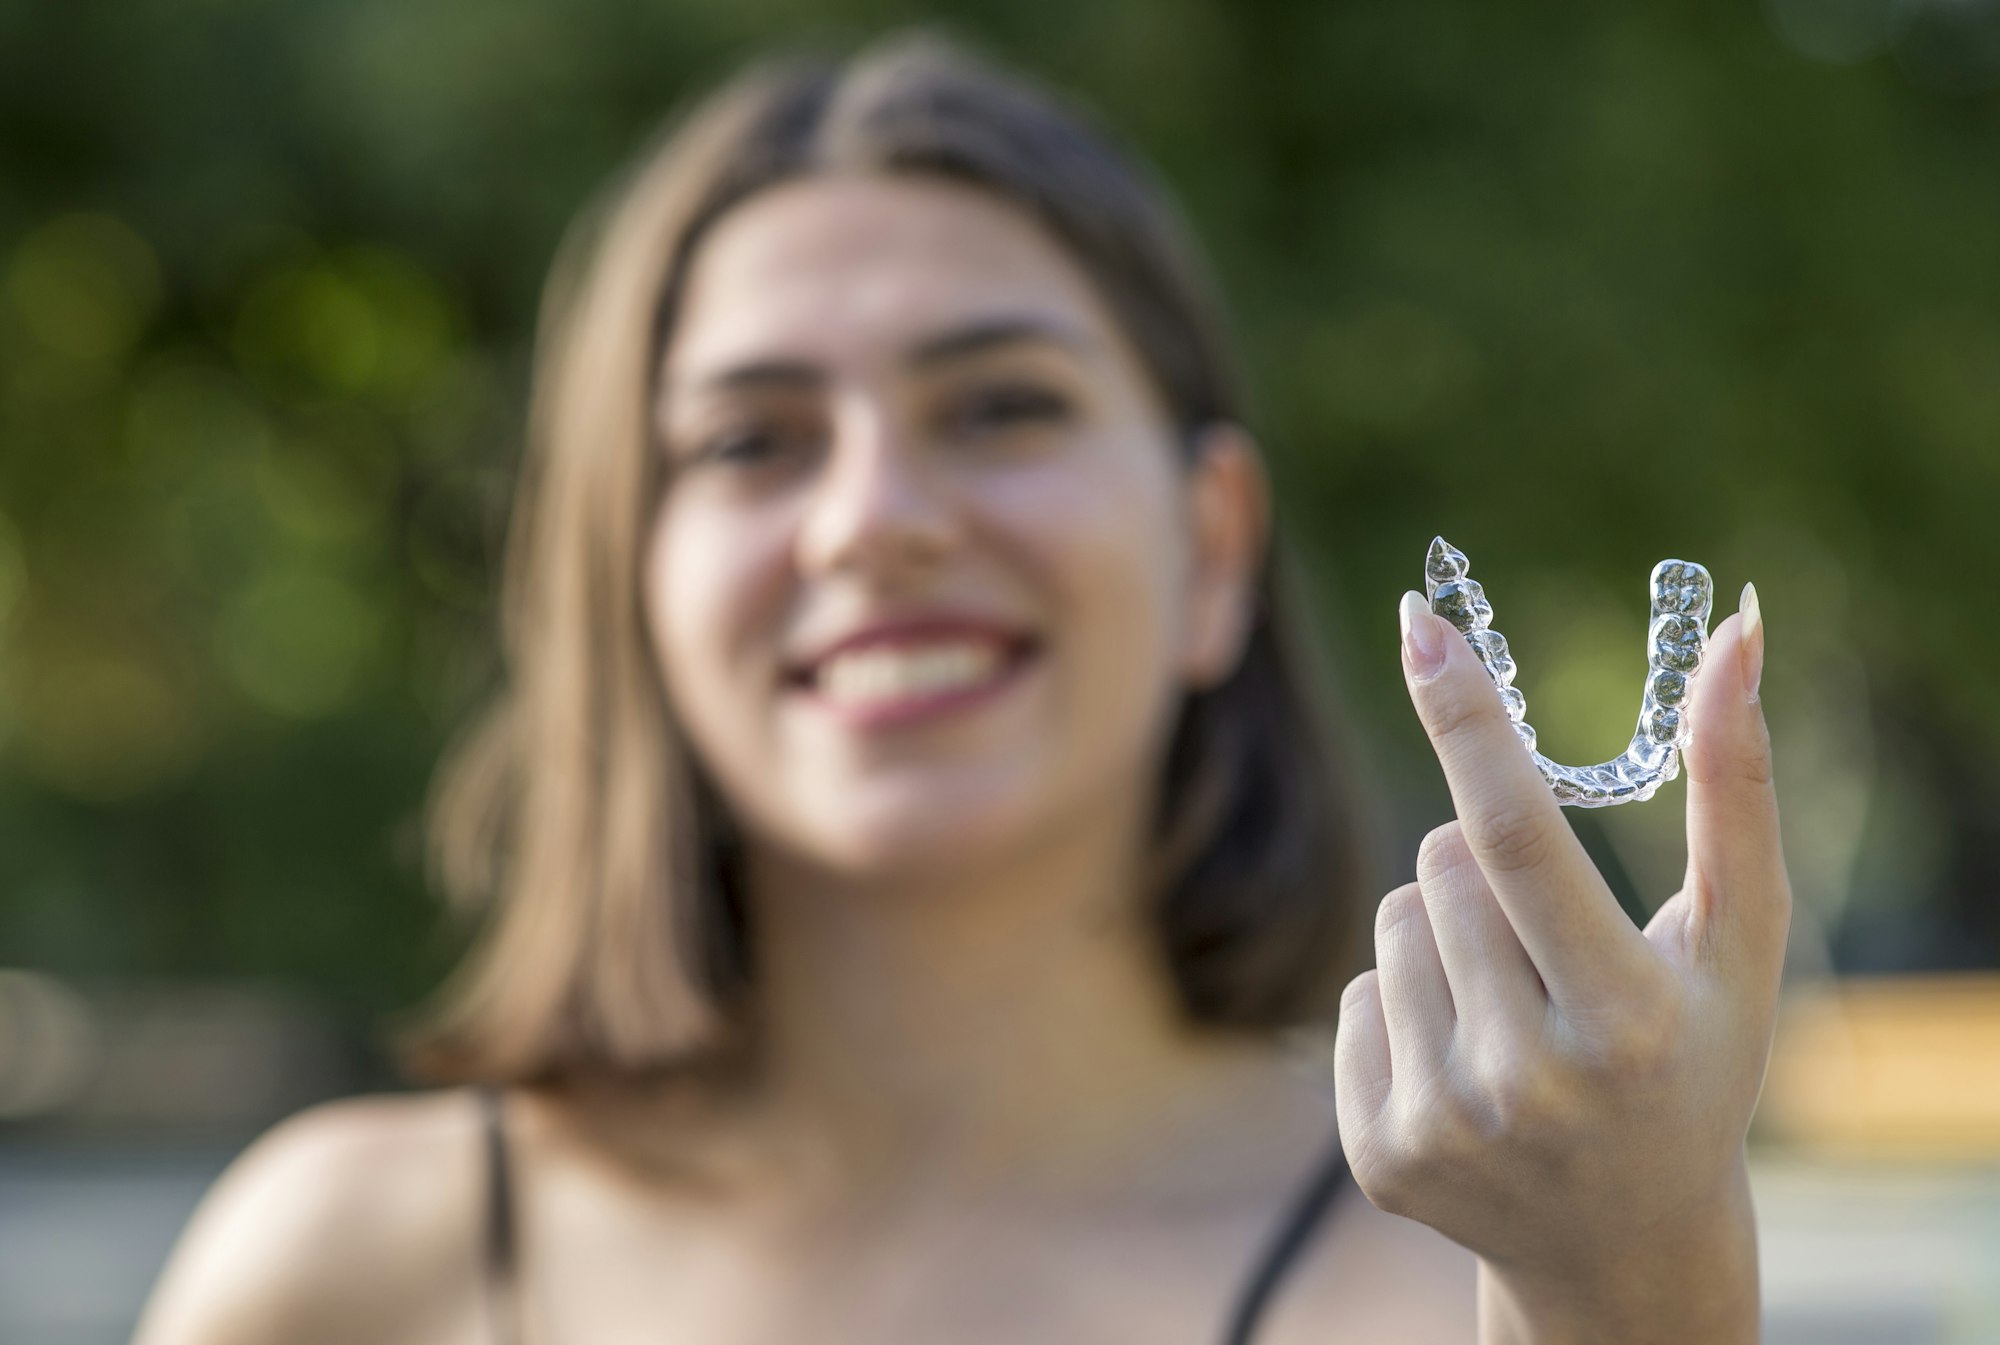 A woman holding up a clear Invisalign aligner, showcasing the benefits of Invisalign over traditional braces at Dalin Dental Associates.